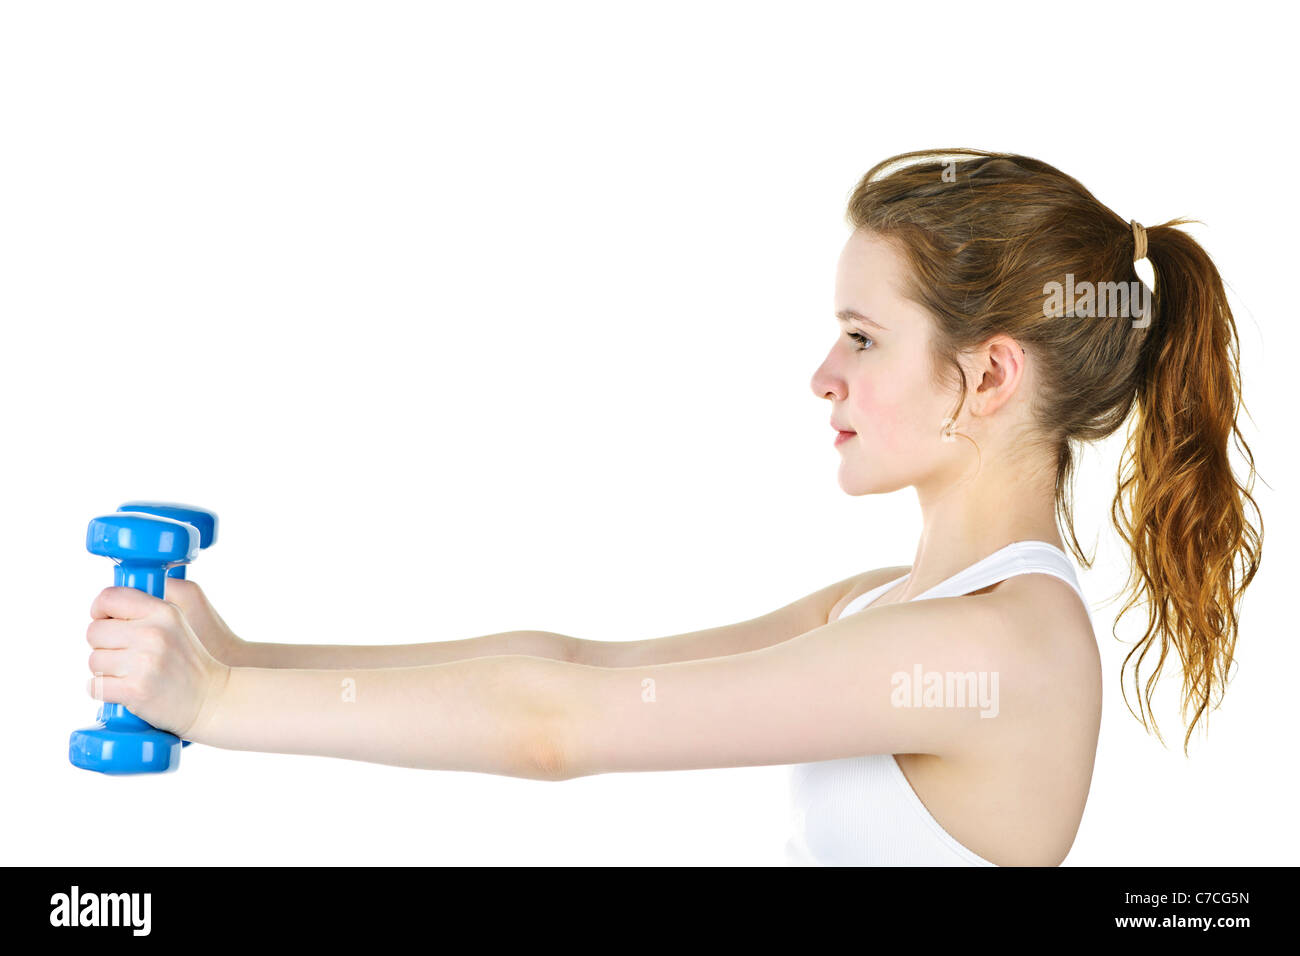 Determined healthy fit young woman lifting weights for fitness exercise Stock Photo